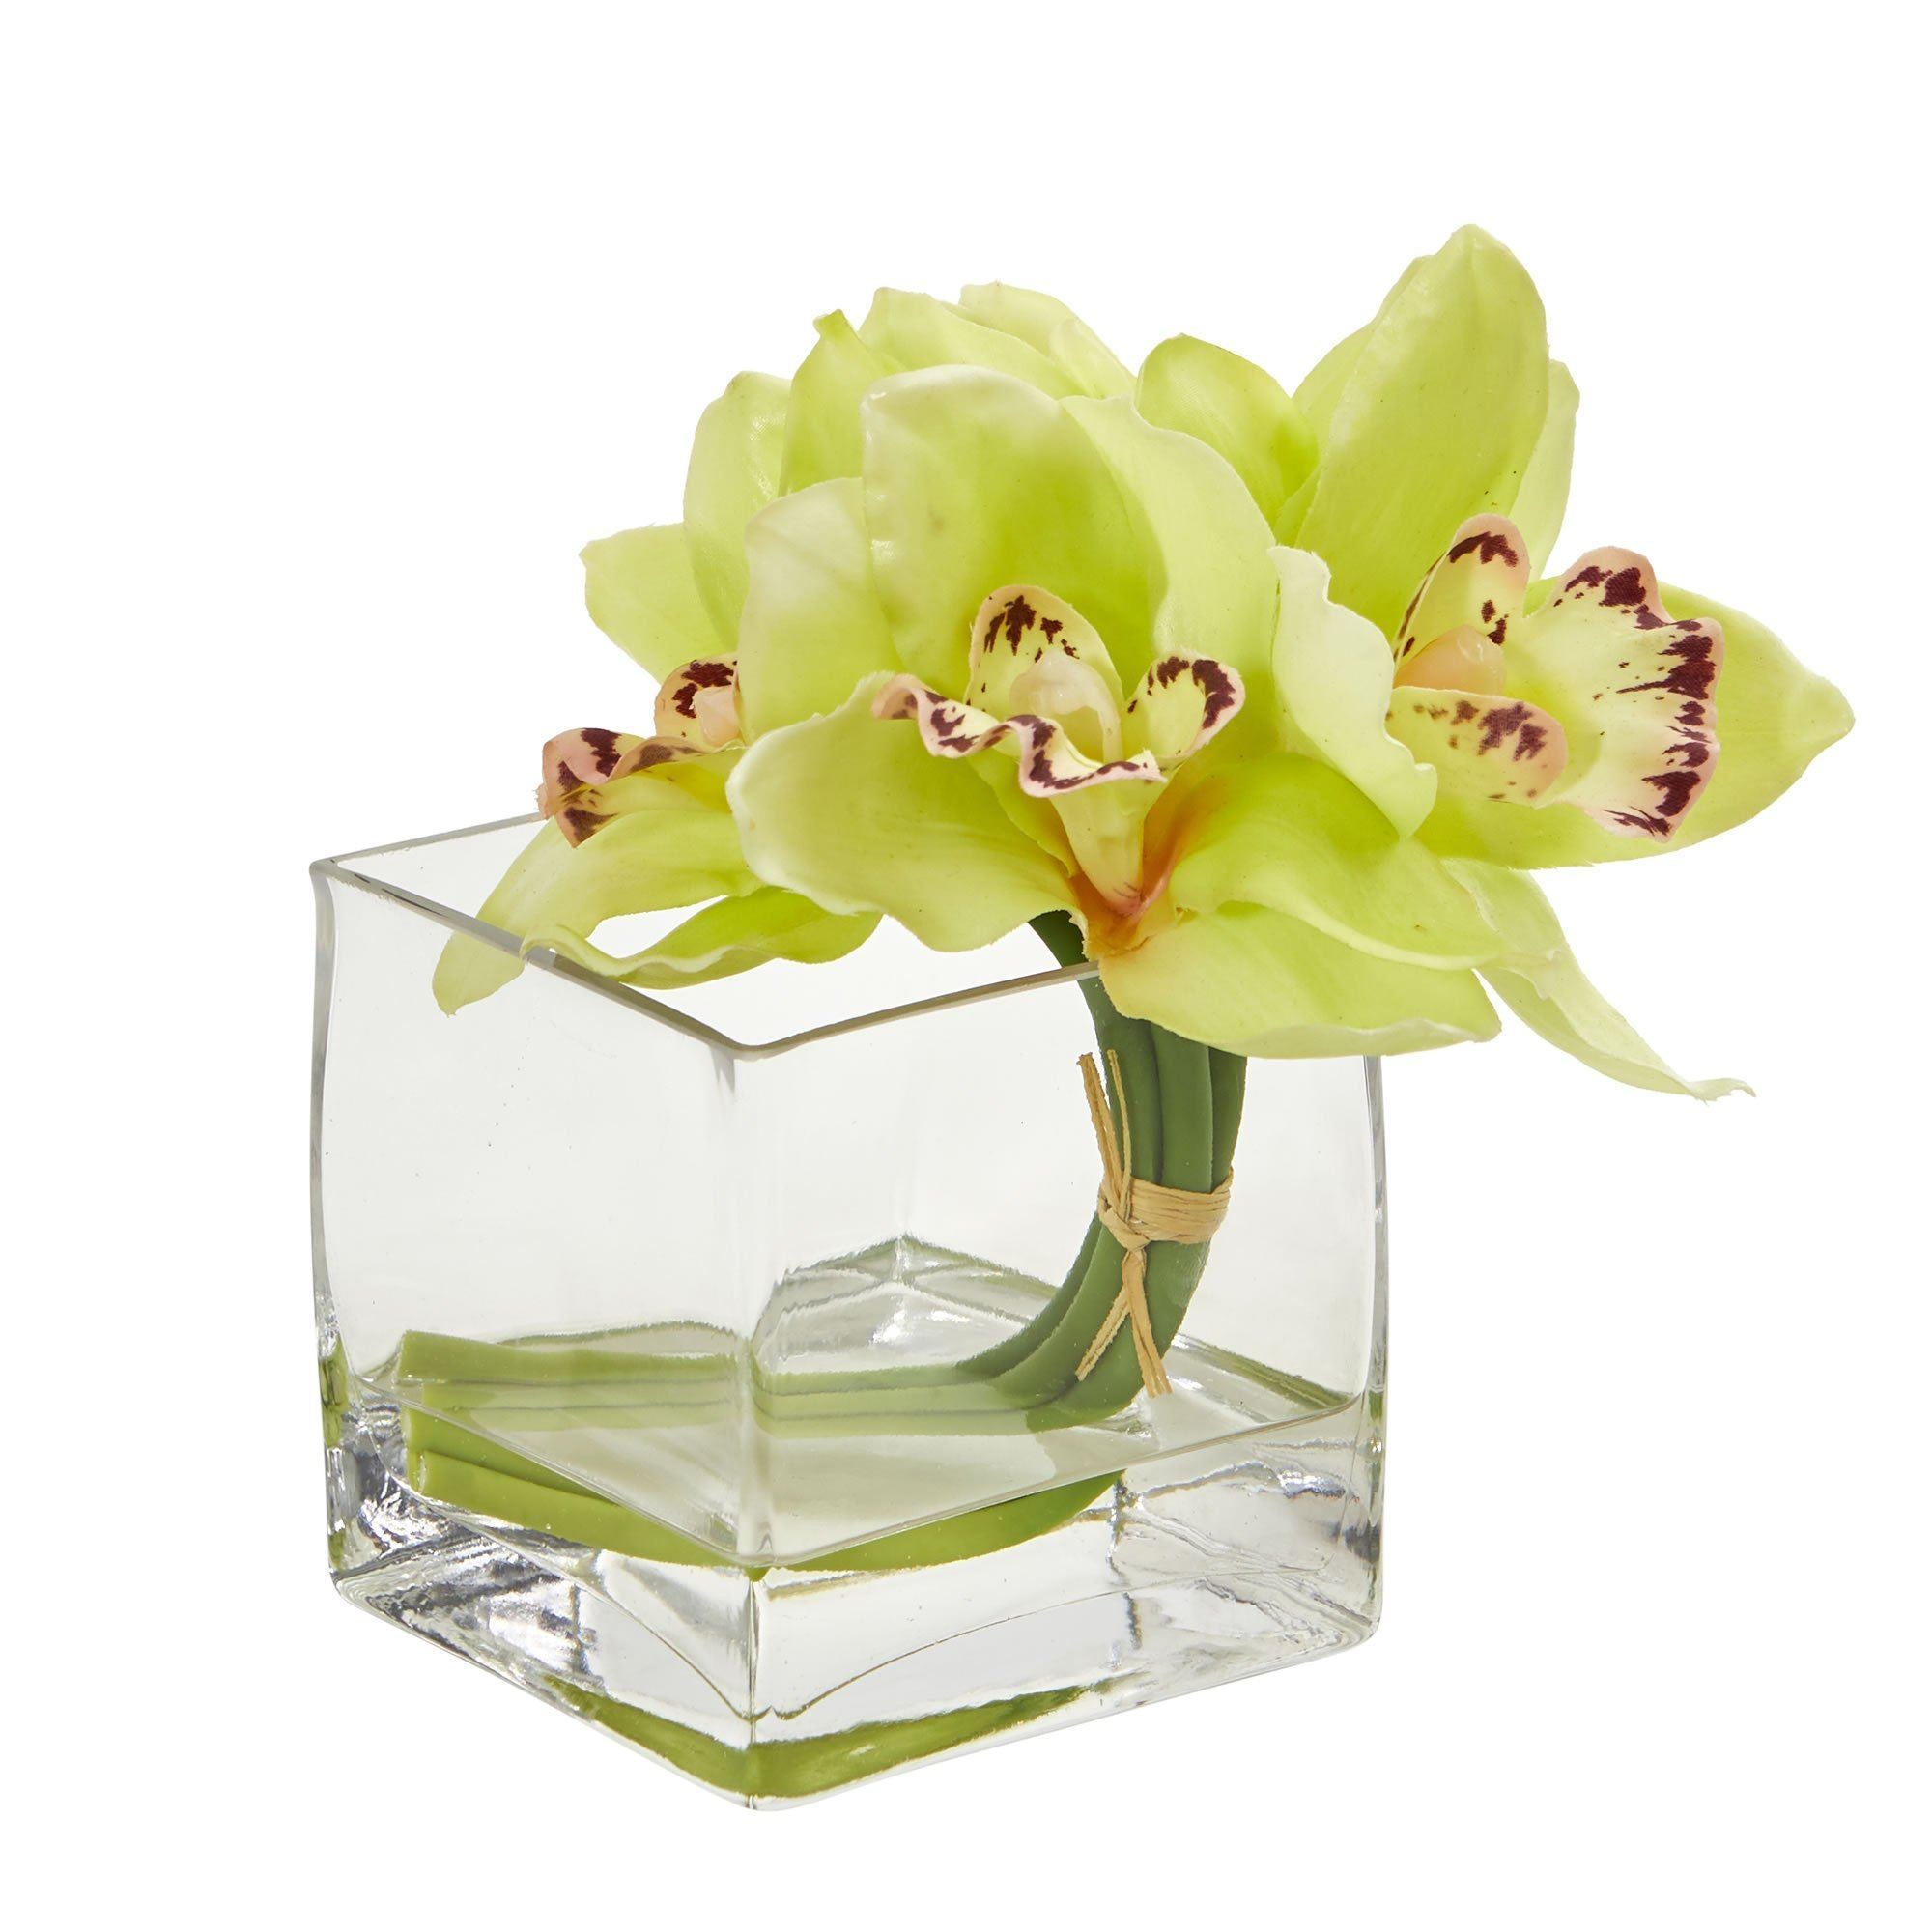 Cymbidium Orchid Artificial Arrangement In Glass Vase Set Of 2 1824 S2 Nearly Natural